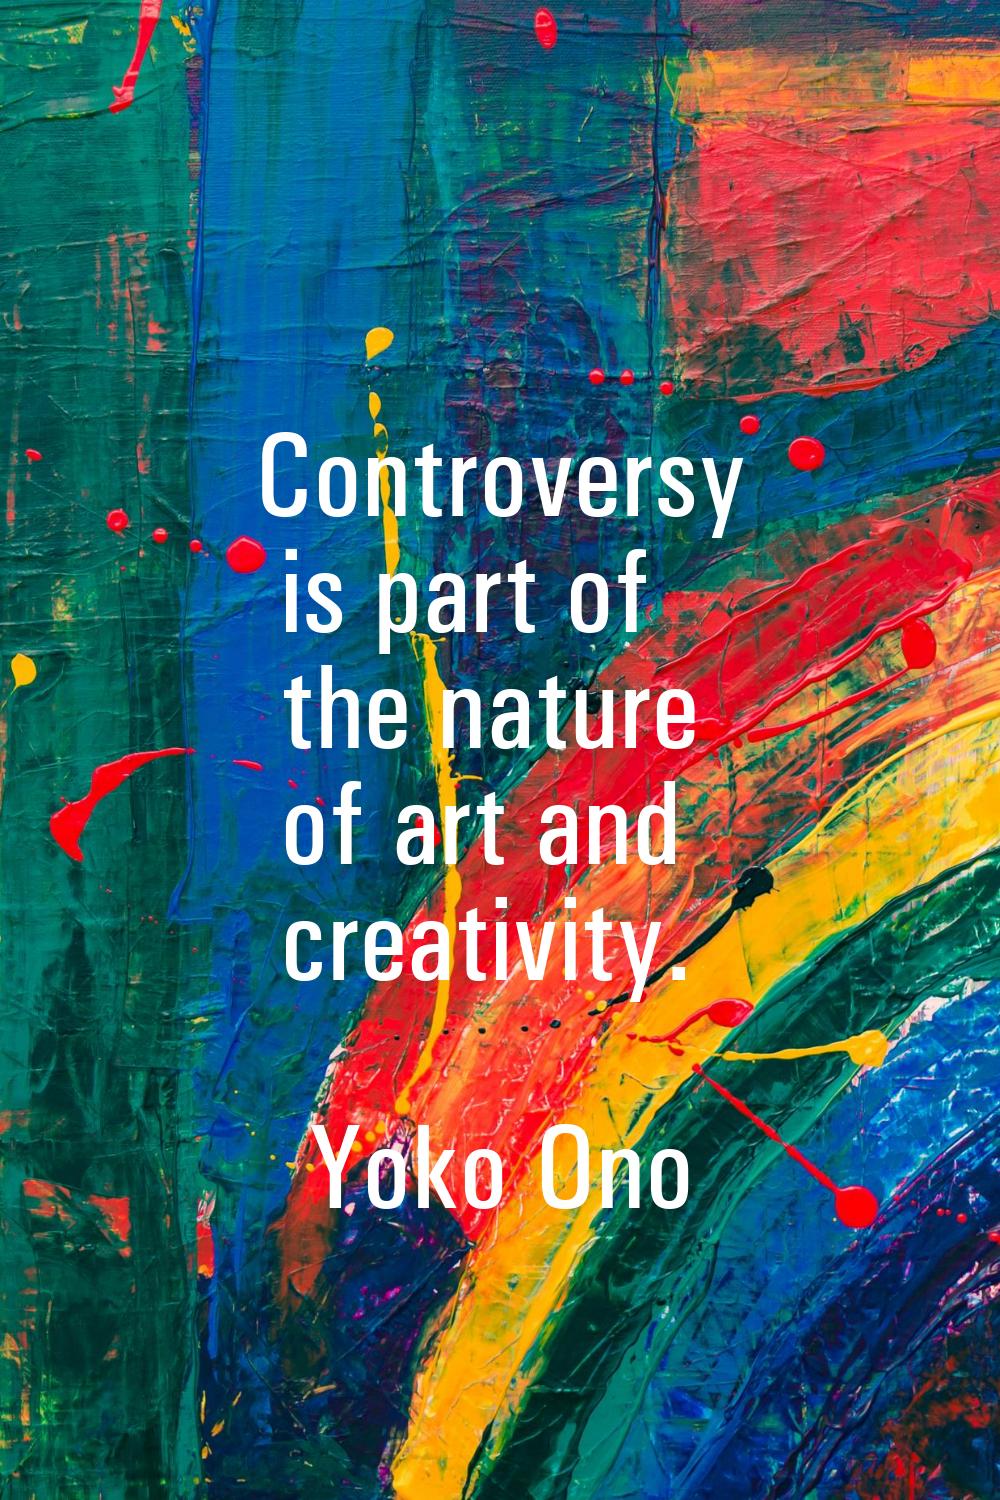 Controversy is part of the nature of art and creativity.